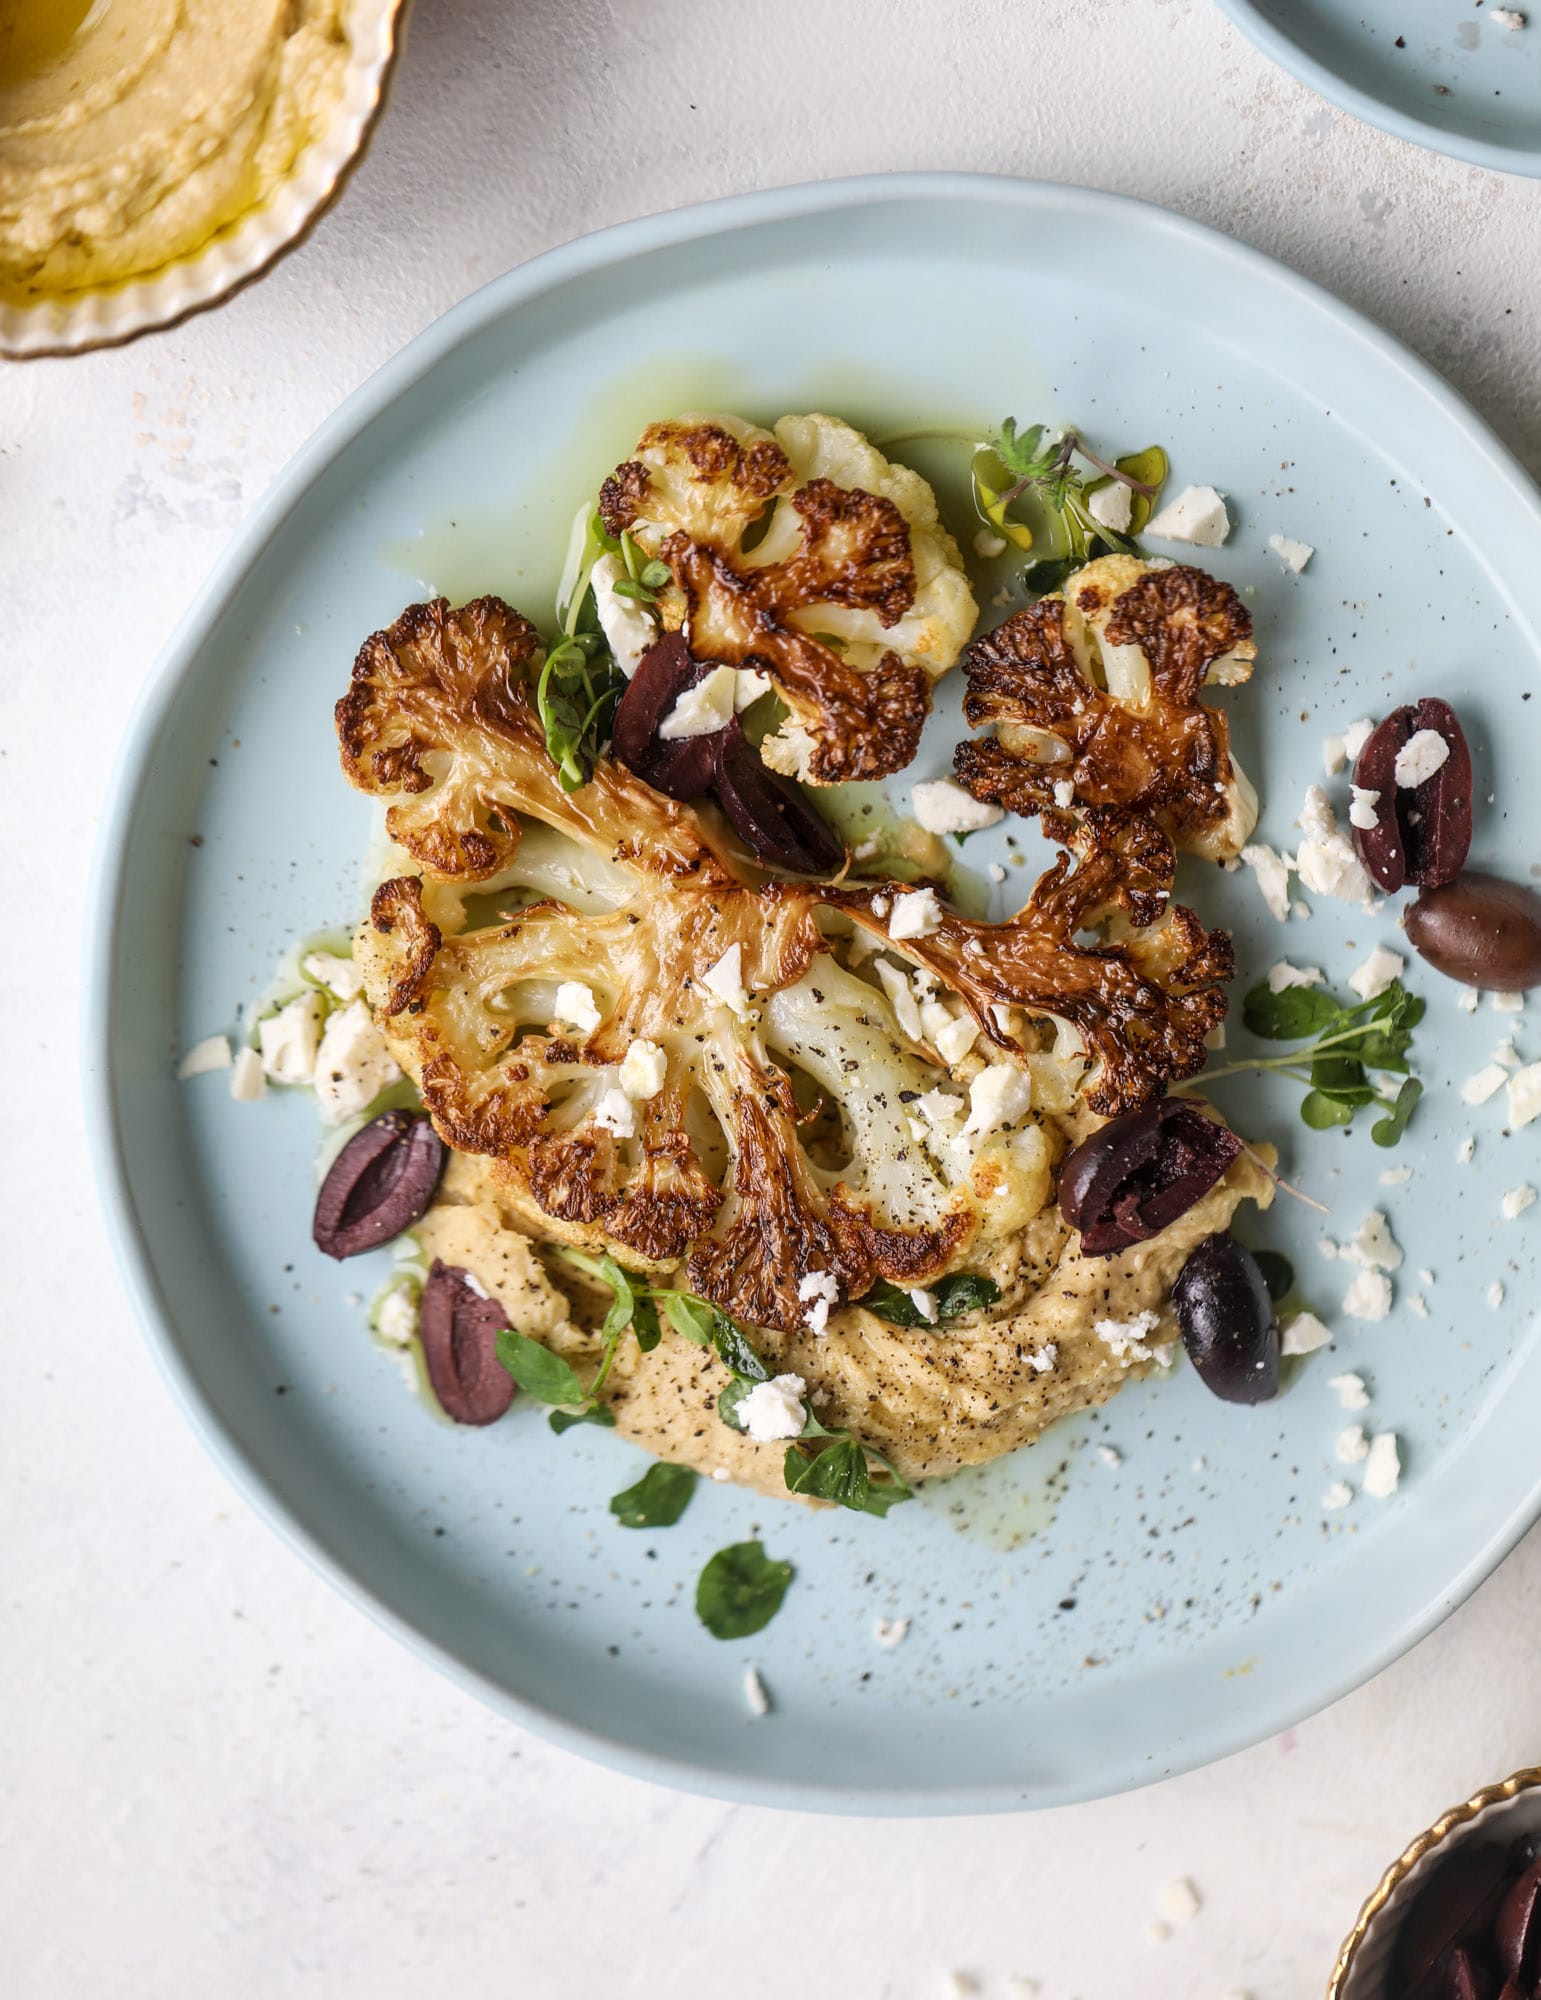 This roasted cauliflower with hummus, olives and feta is super flavorful and a wonderful meal, side dish or snack. Flavorful roasted cauliflower, creamy hummus, briney olives and tangy feta come together to make a major taste explosion. I howsweeteats.com #roasted #cauliflower #hummus #olives #feta